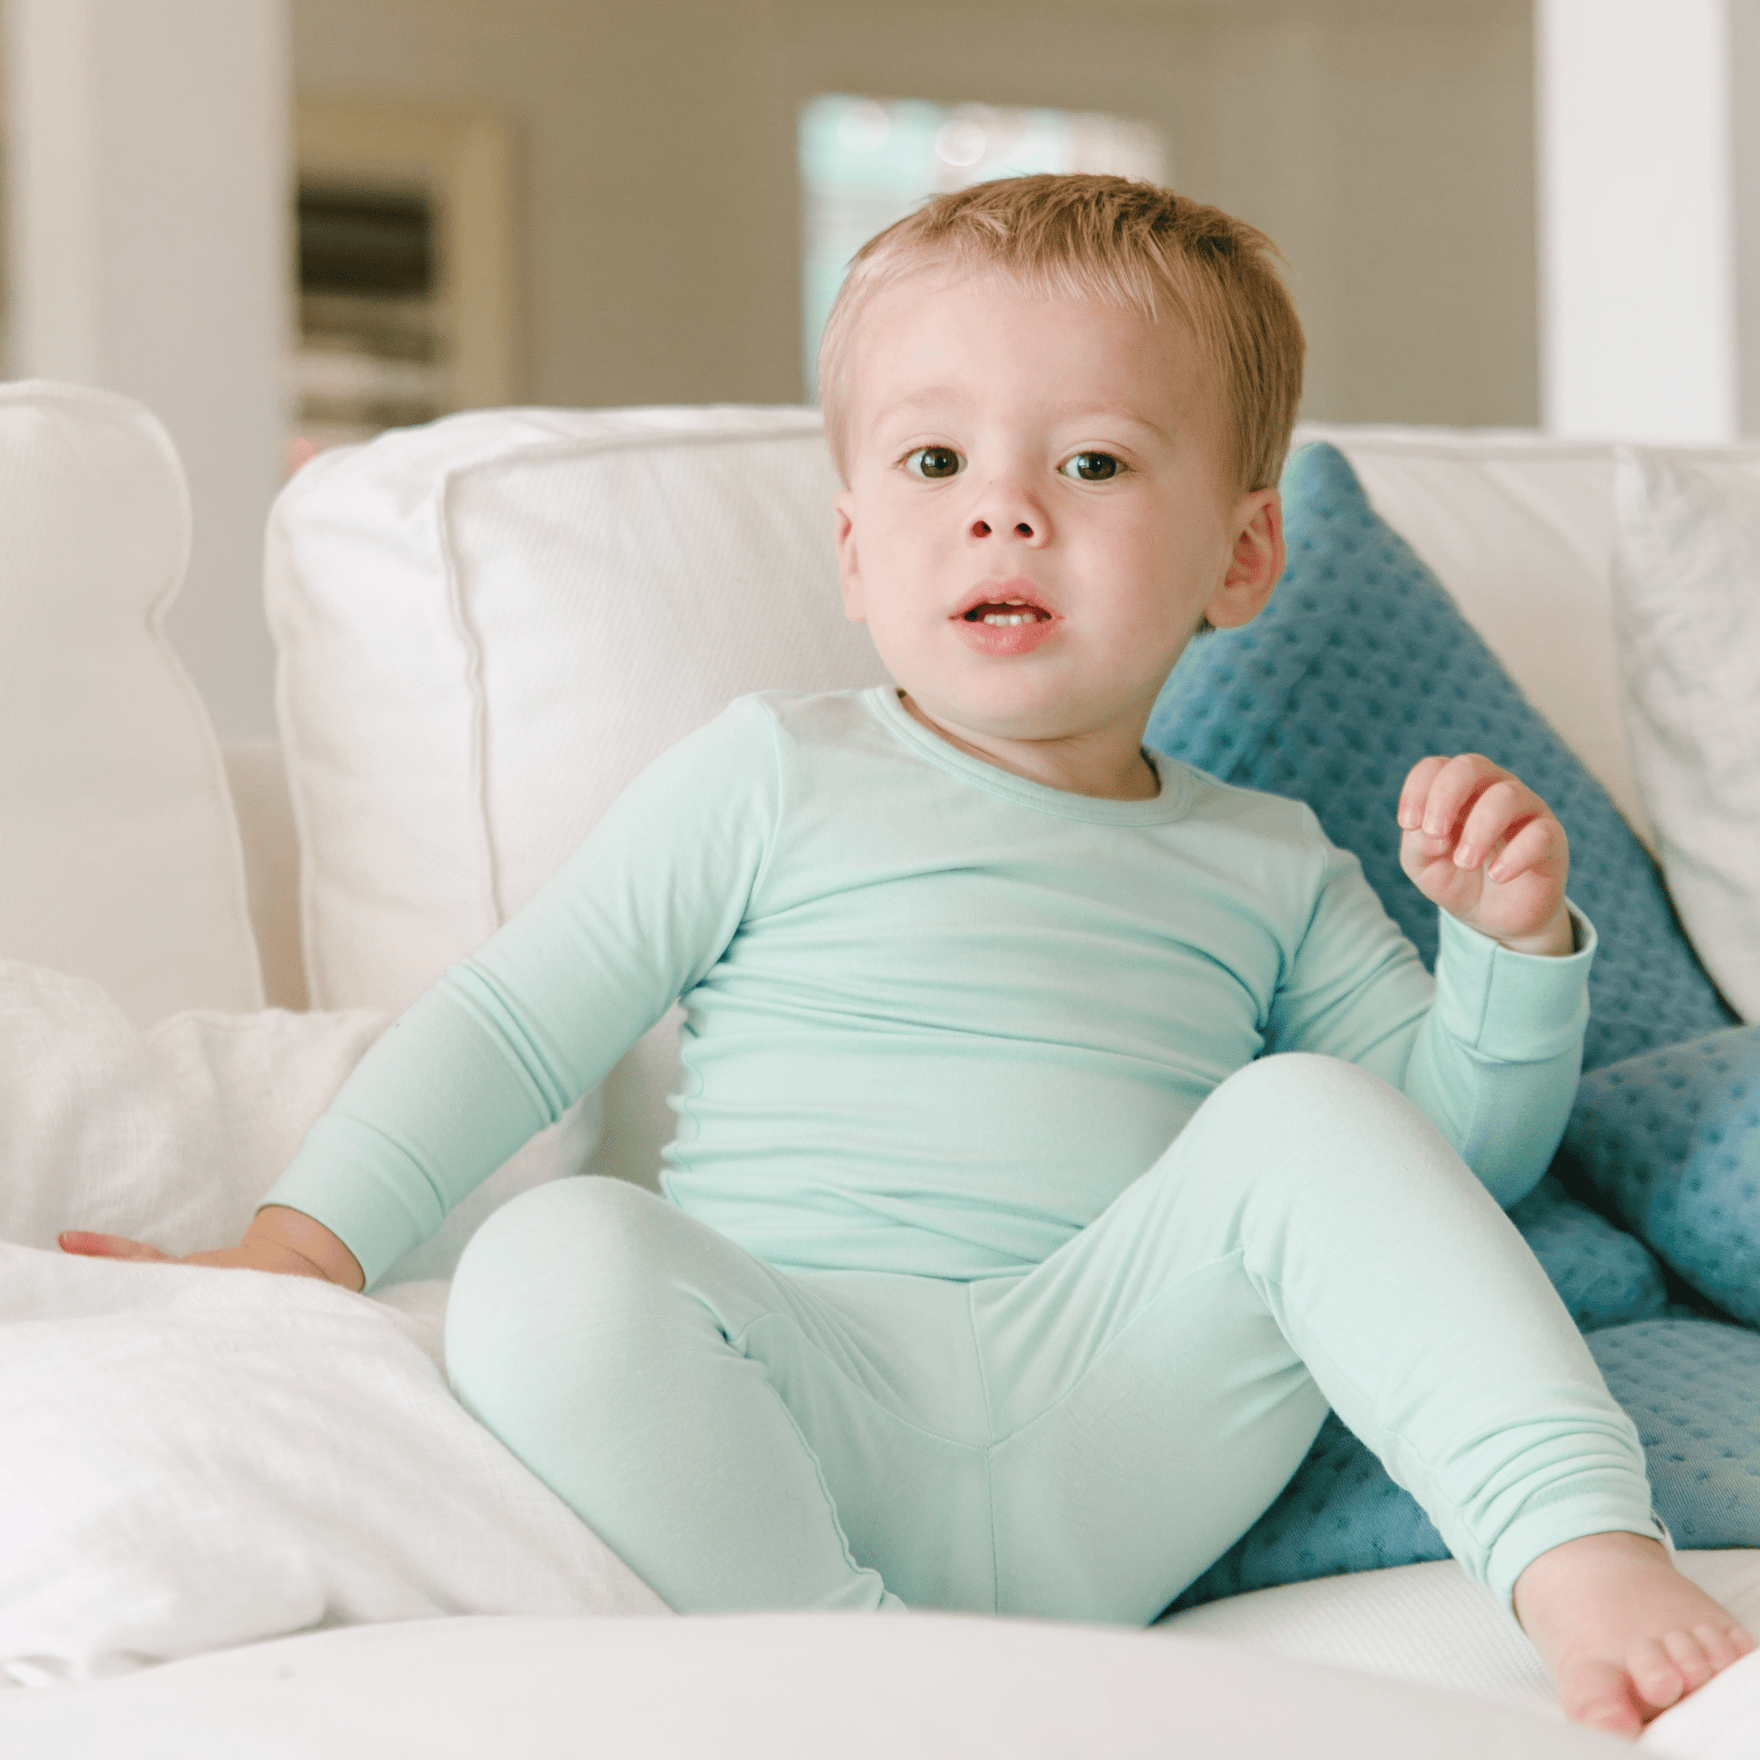 2 Year Old Sleep Regression: Signs, Causes, & Survival Tips